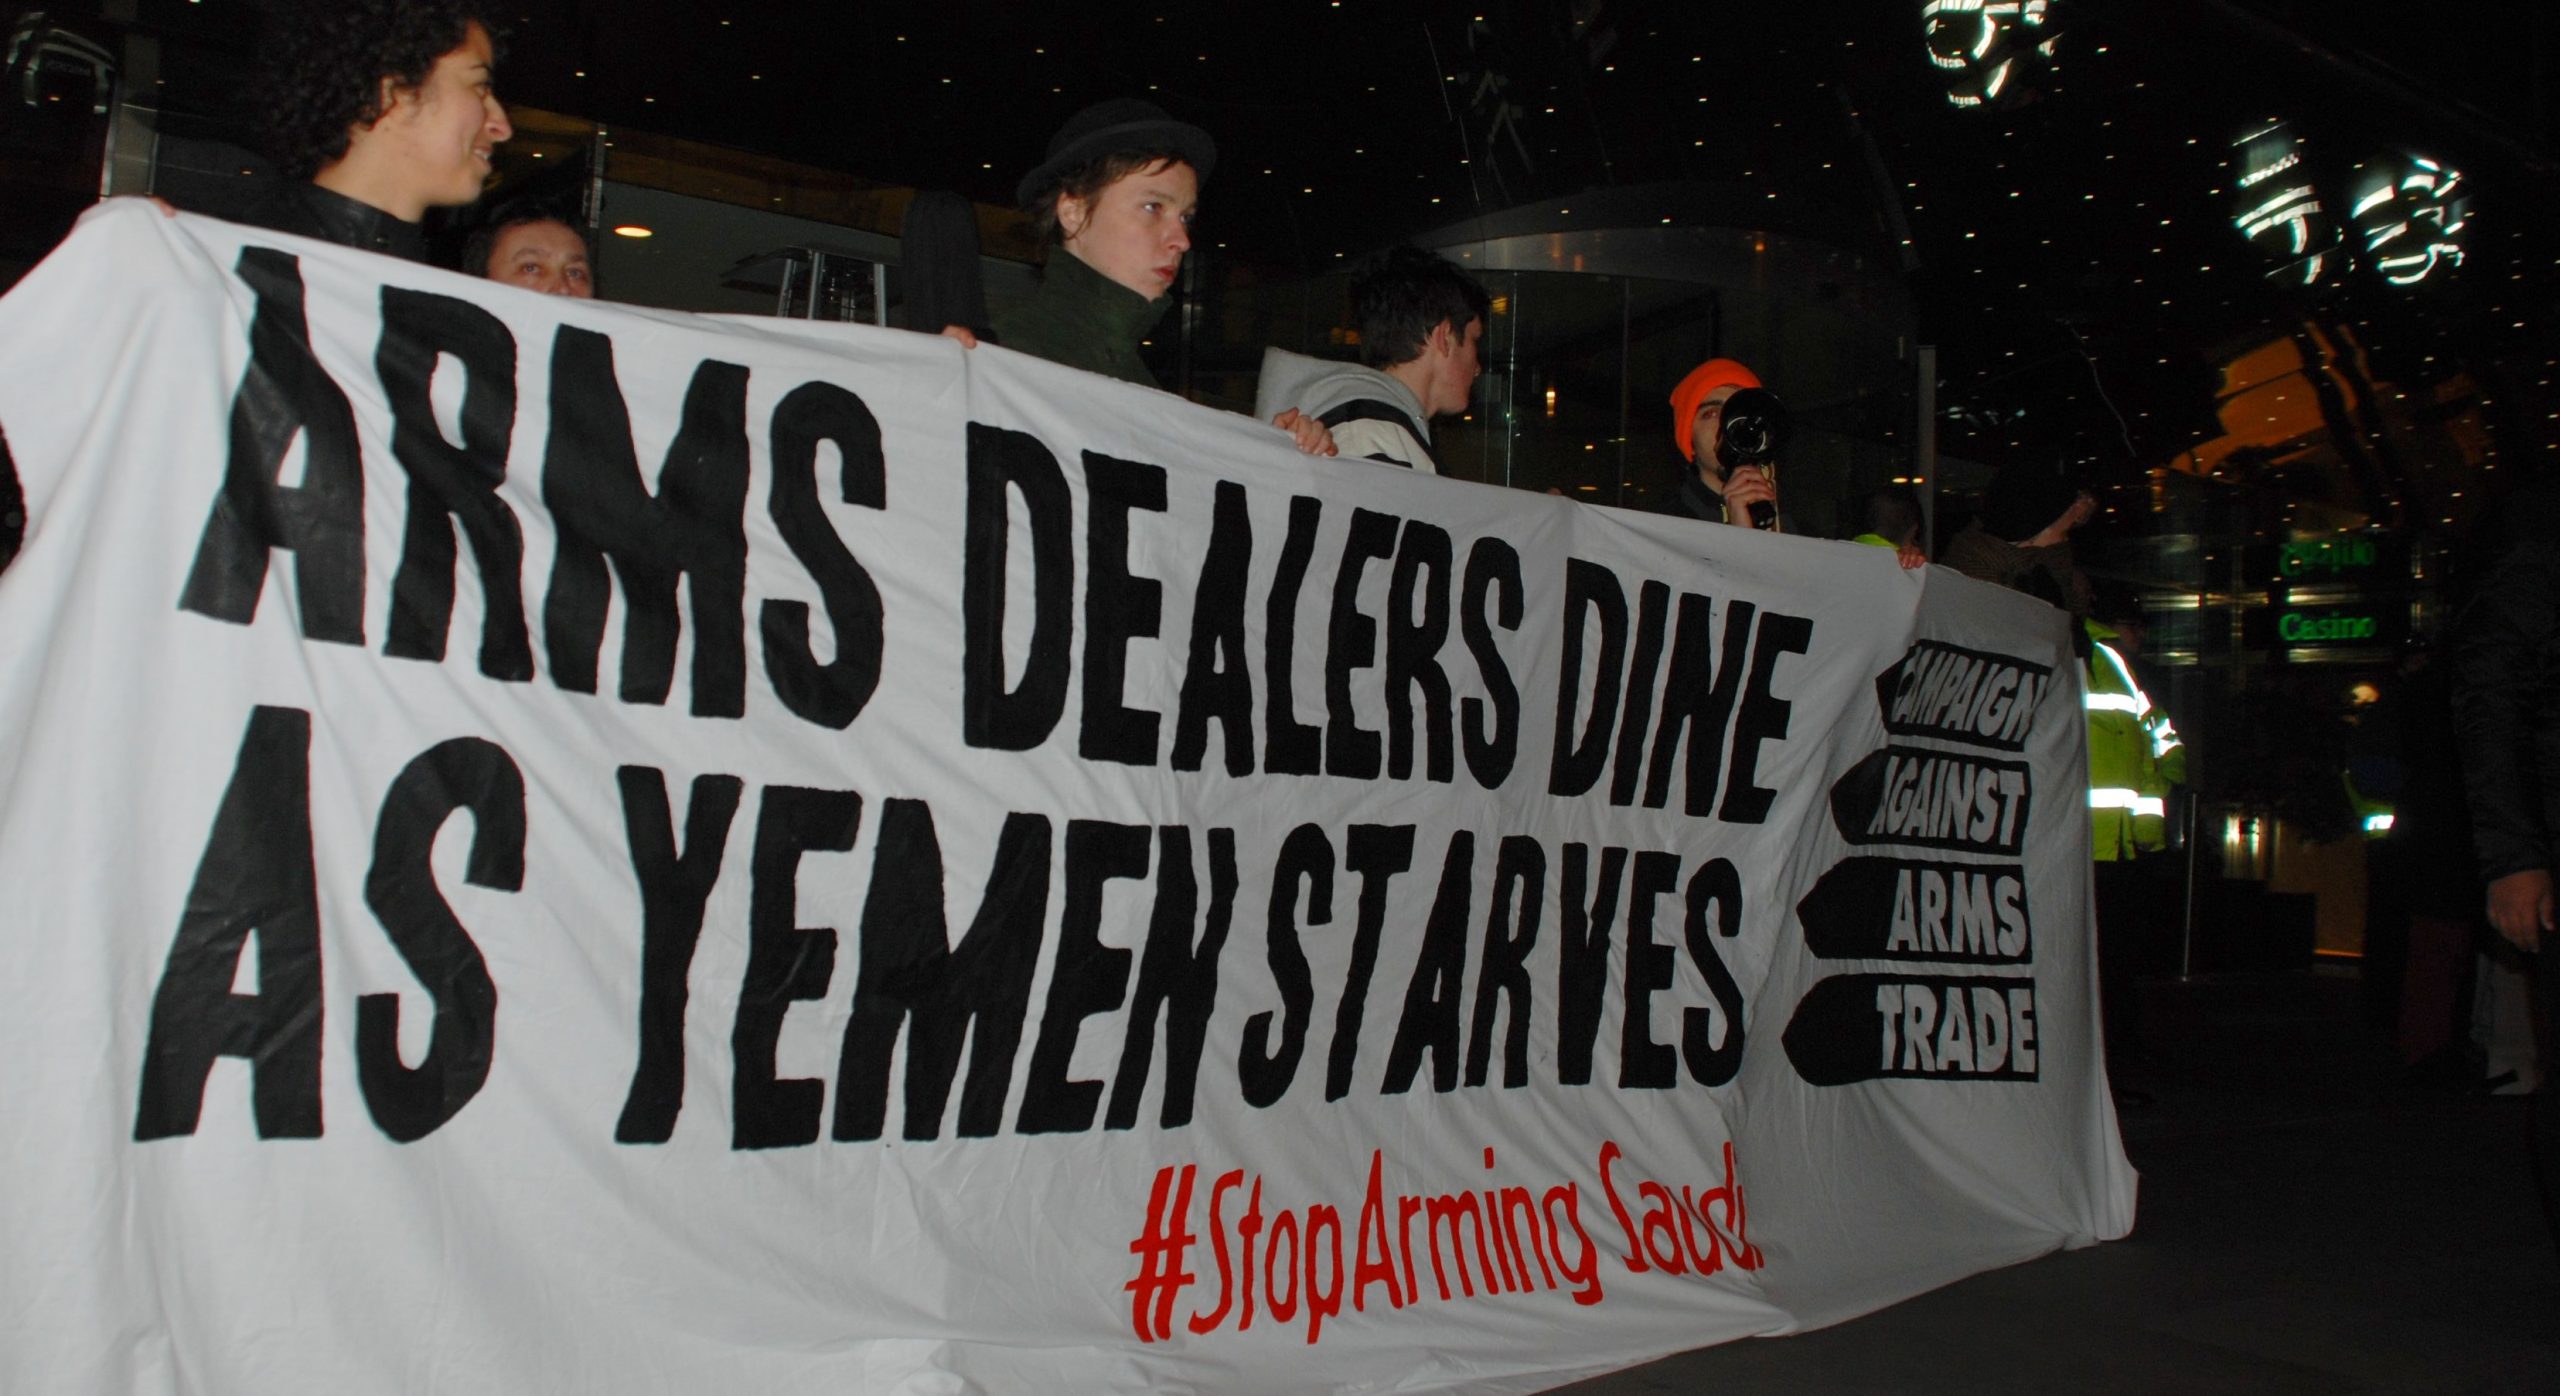 Arms Dealers Dine as Yemen Starves #StopArming Saudi CAAT banner held by four activists outside a hotel under a mirrored canopy. The mirror reflects policeman in fluorescent jackets.